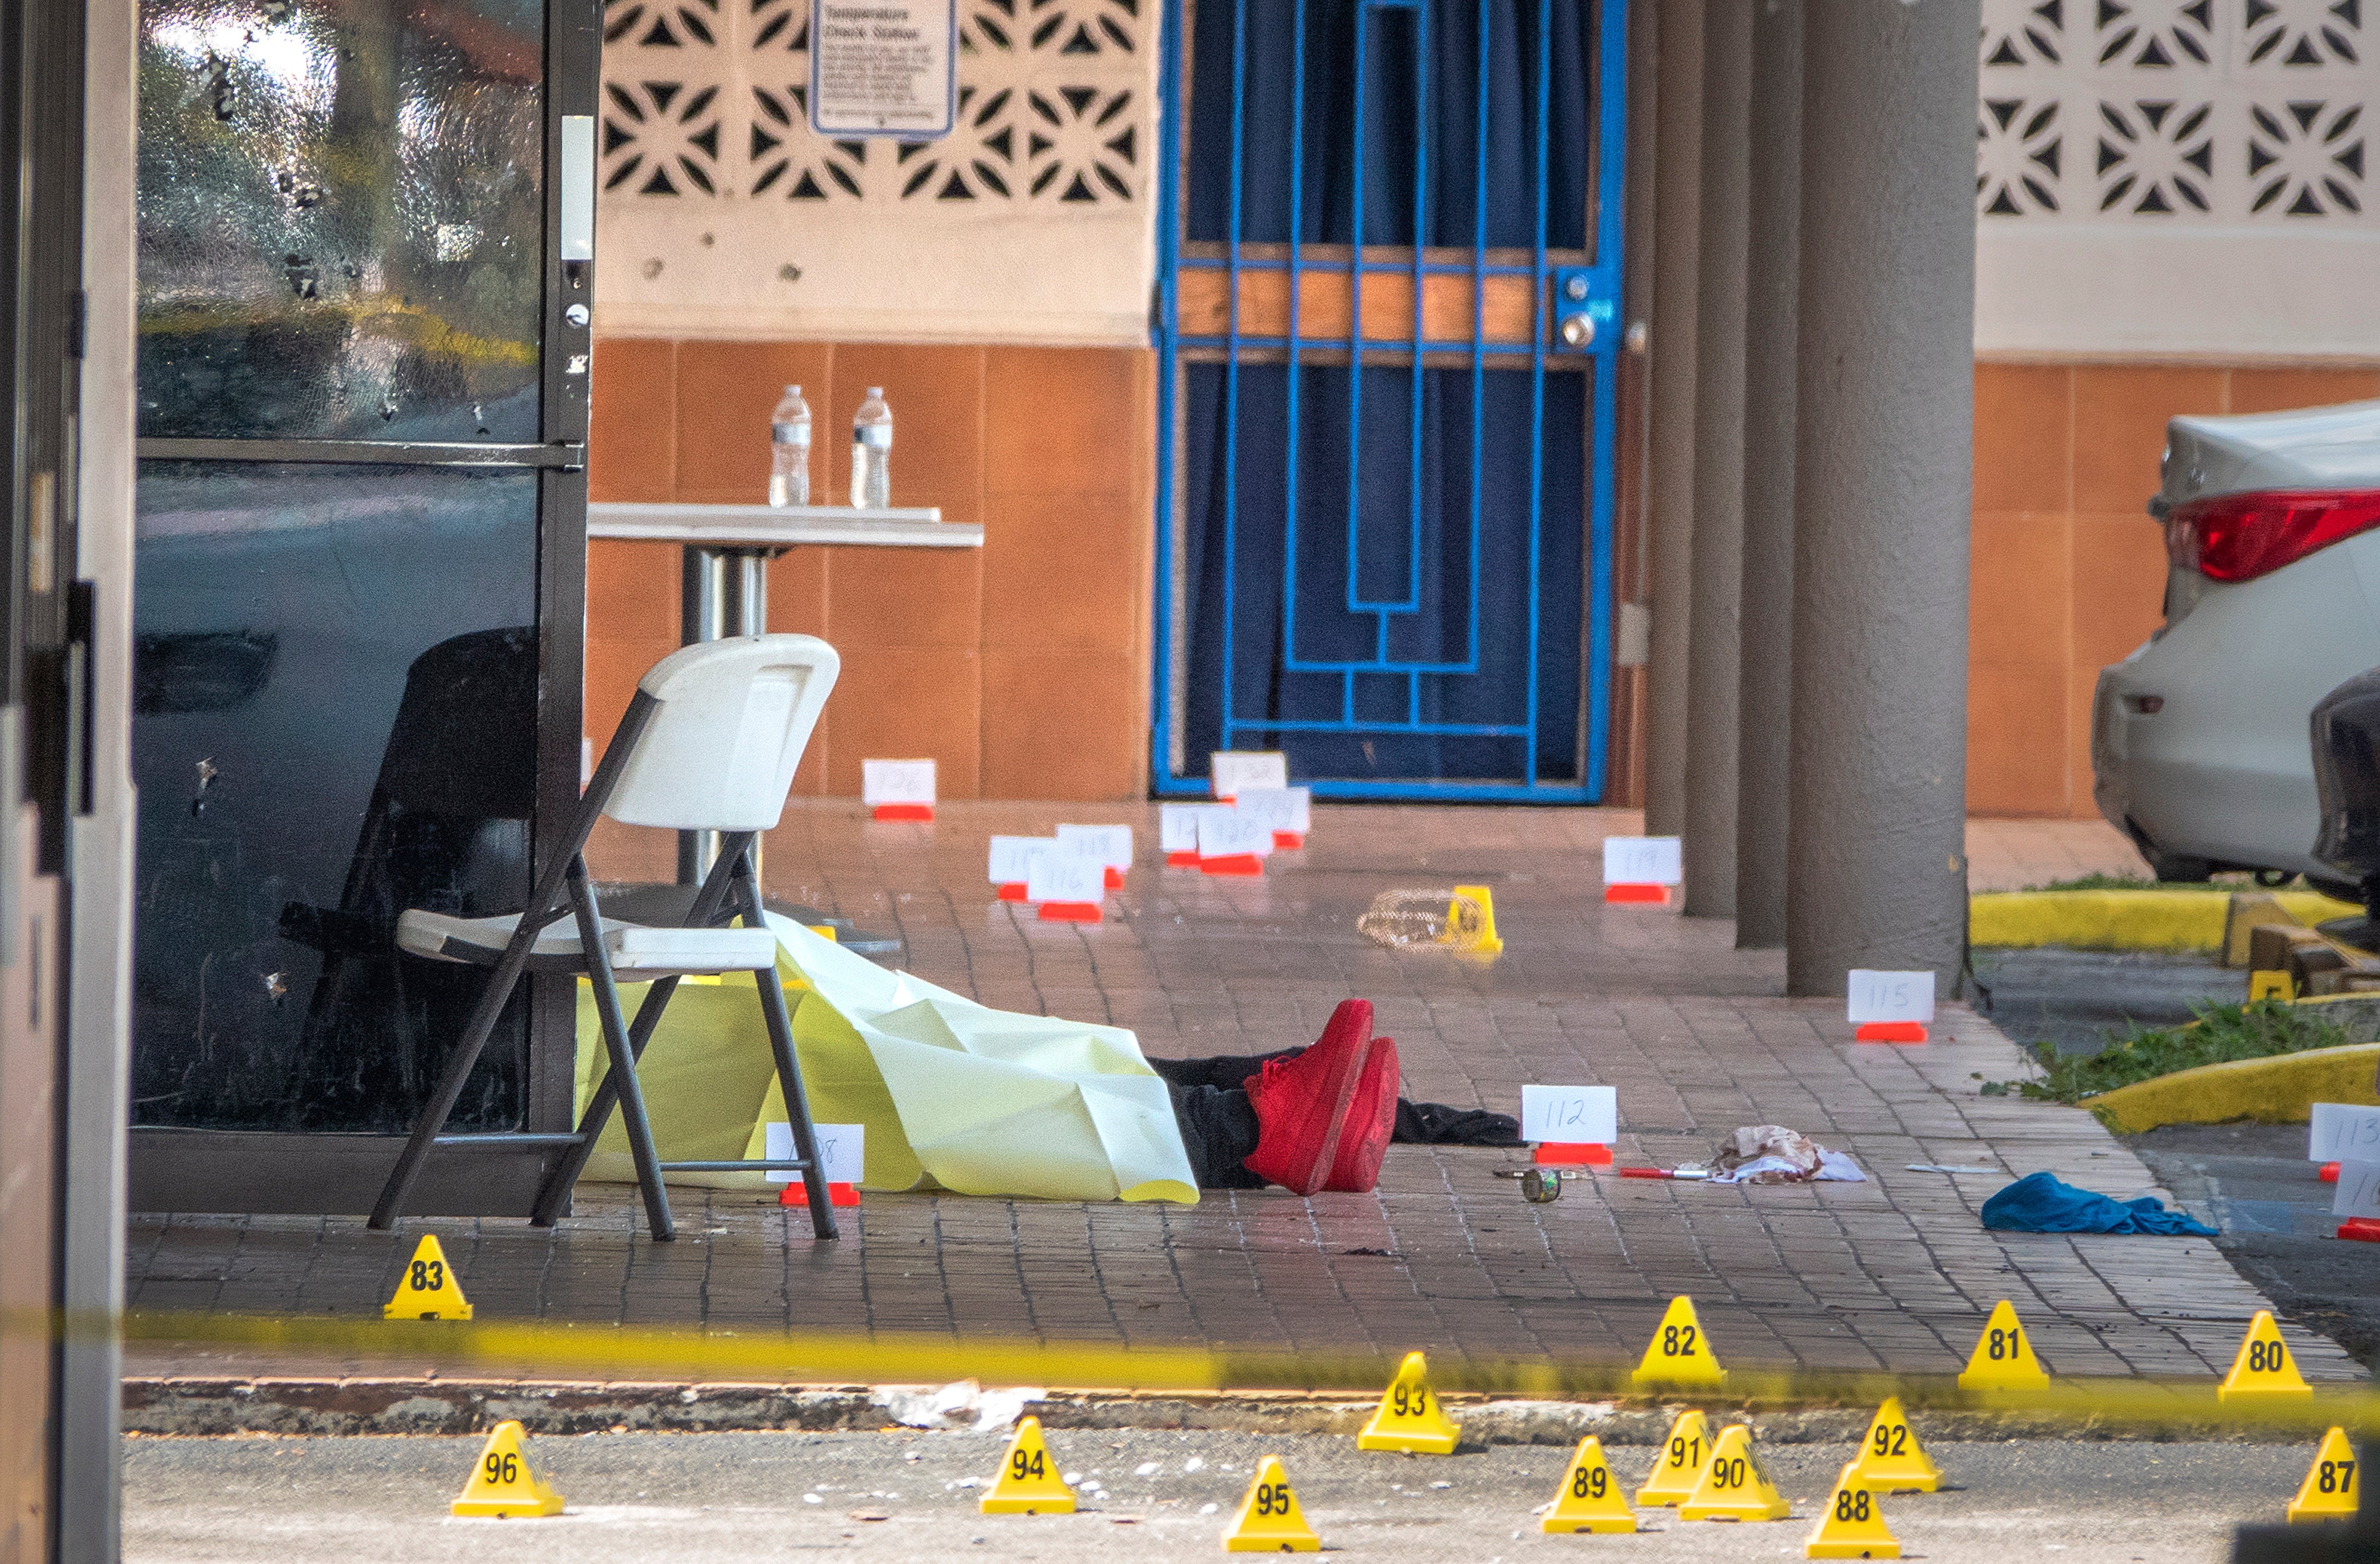 A victim's body is seen at the shooting scene at entrance of the Billiards banquet hall in Miami Gardens